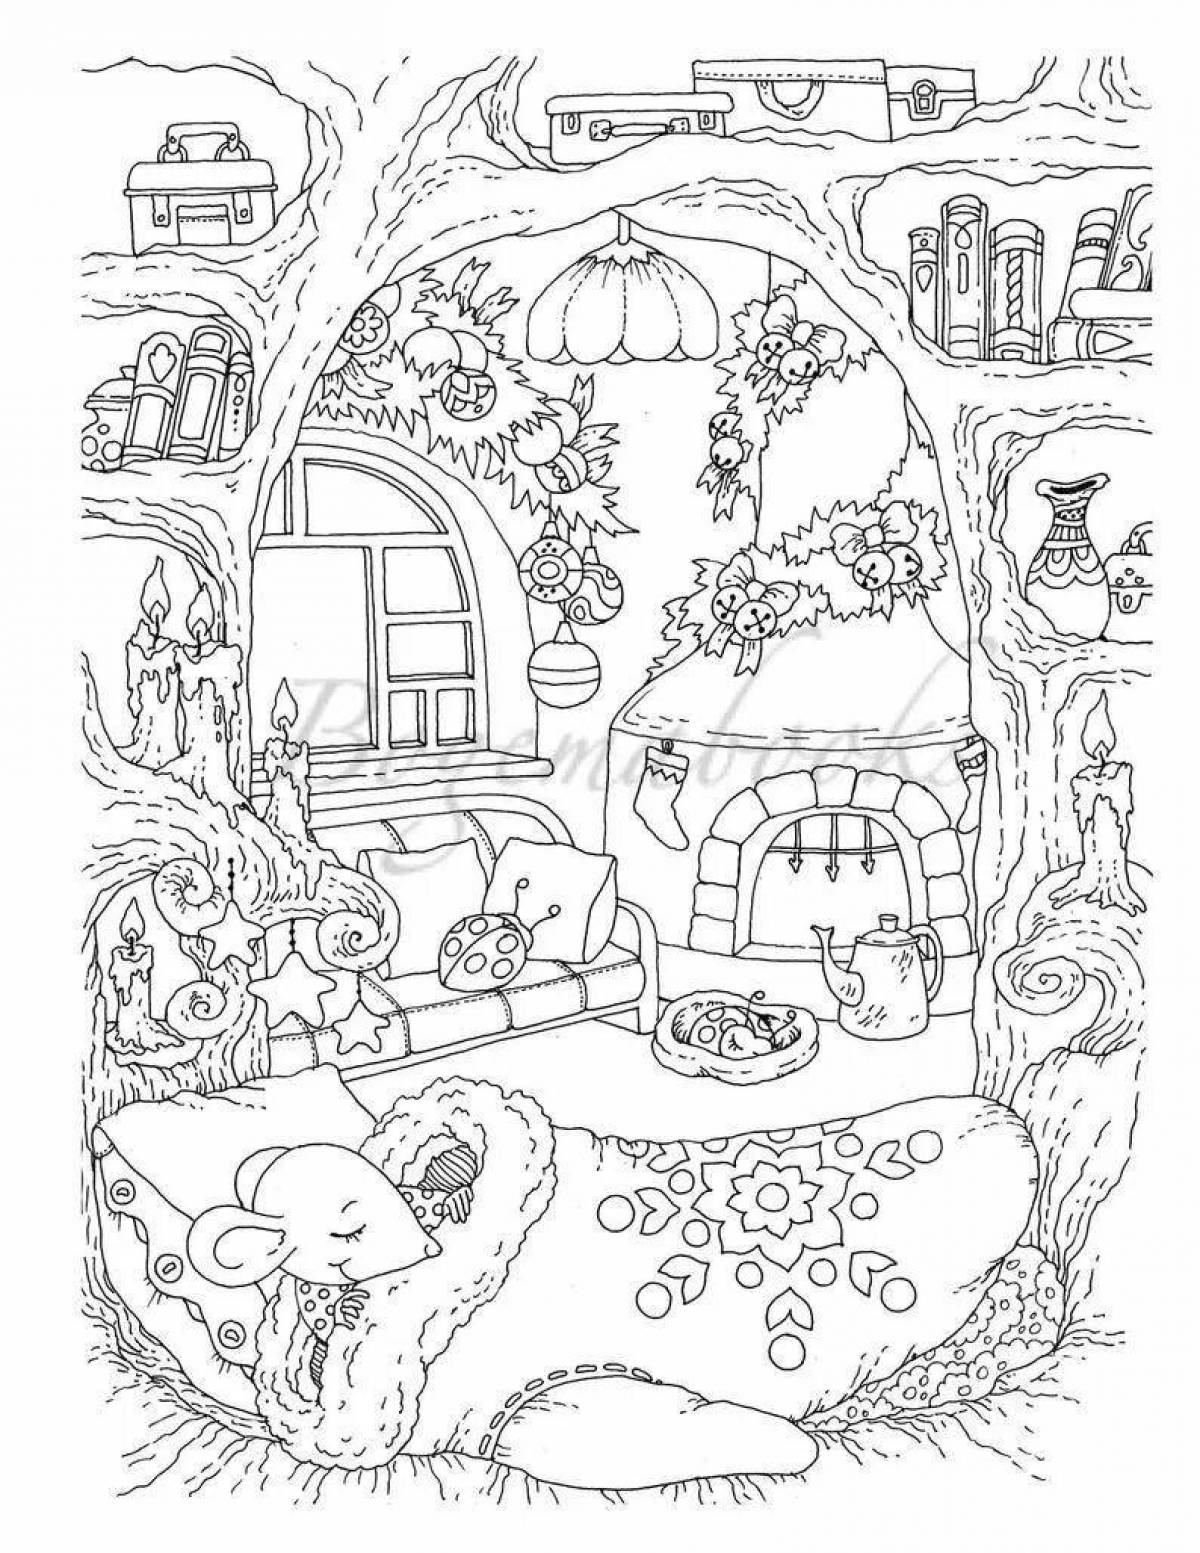 Cute animal house coloring page